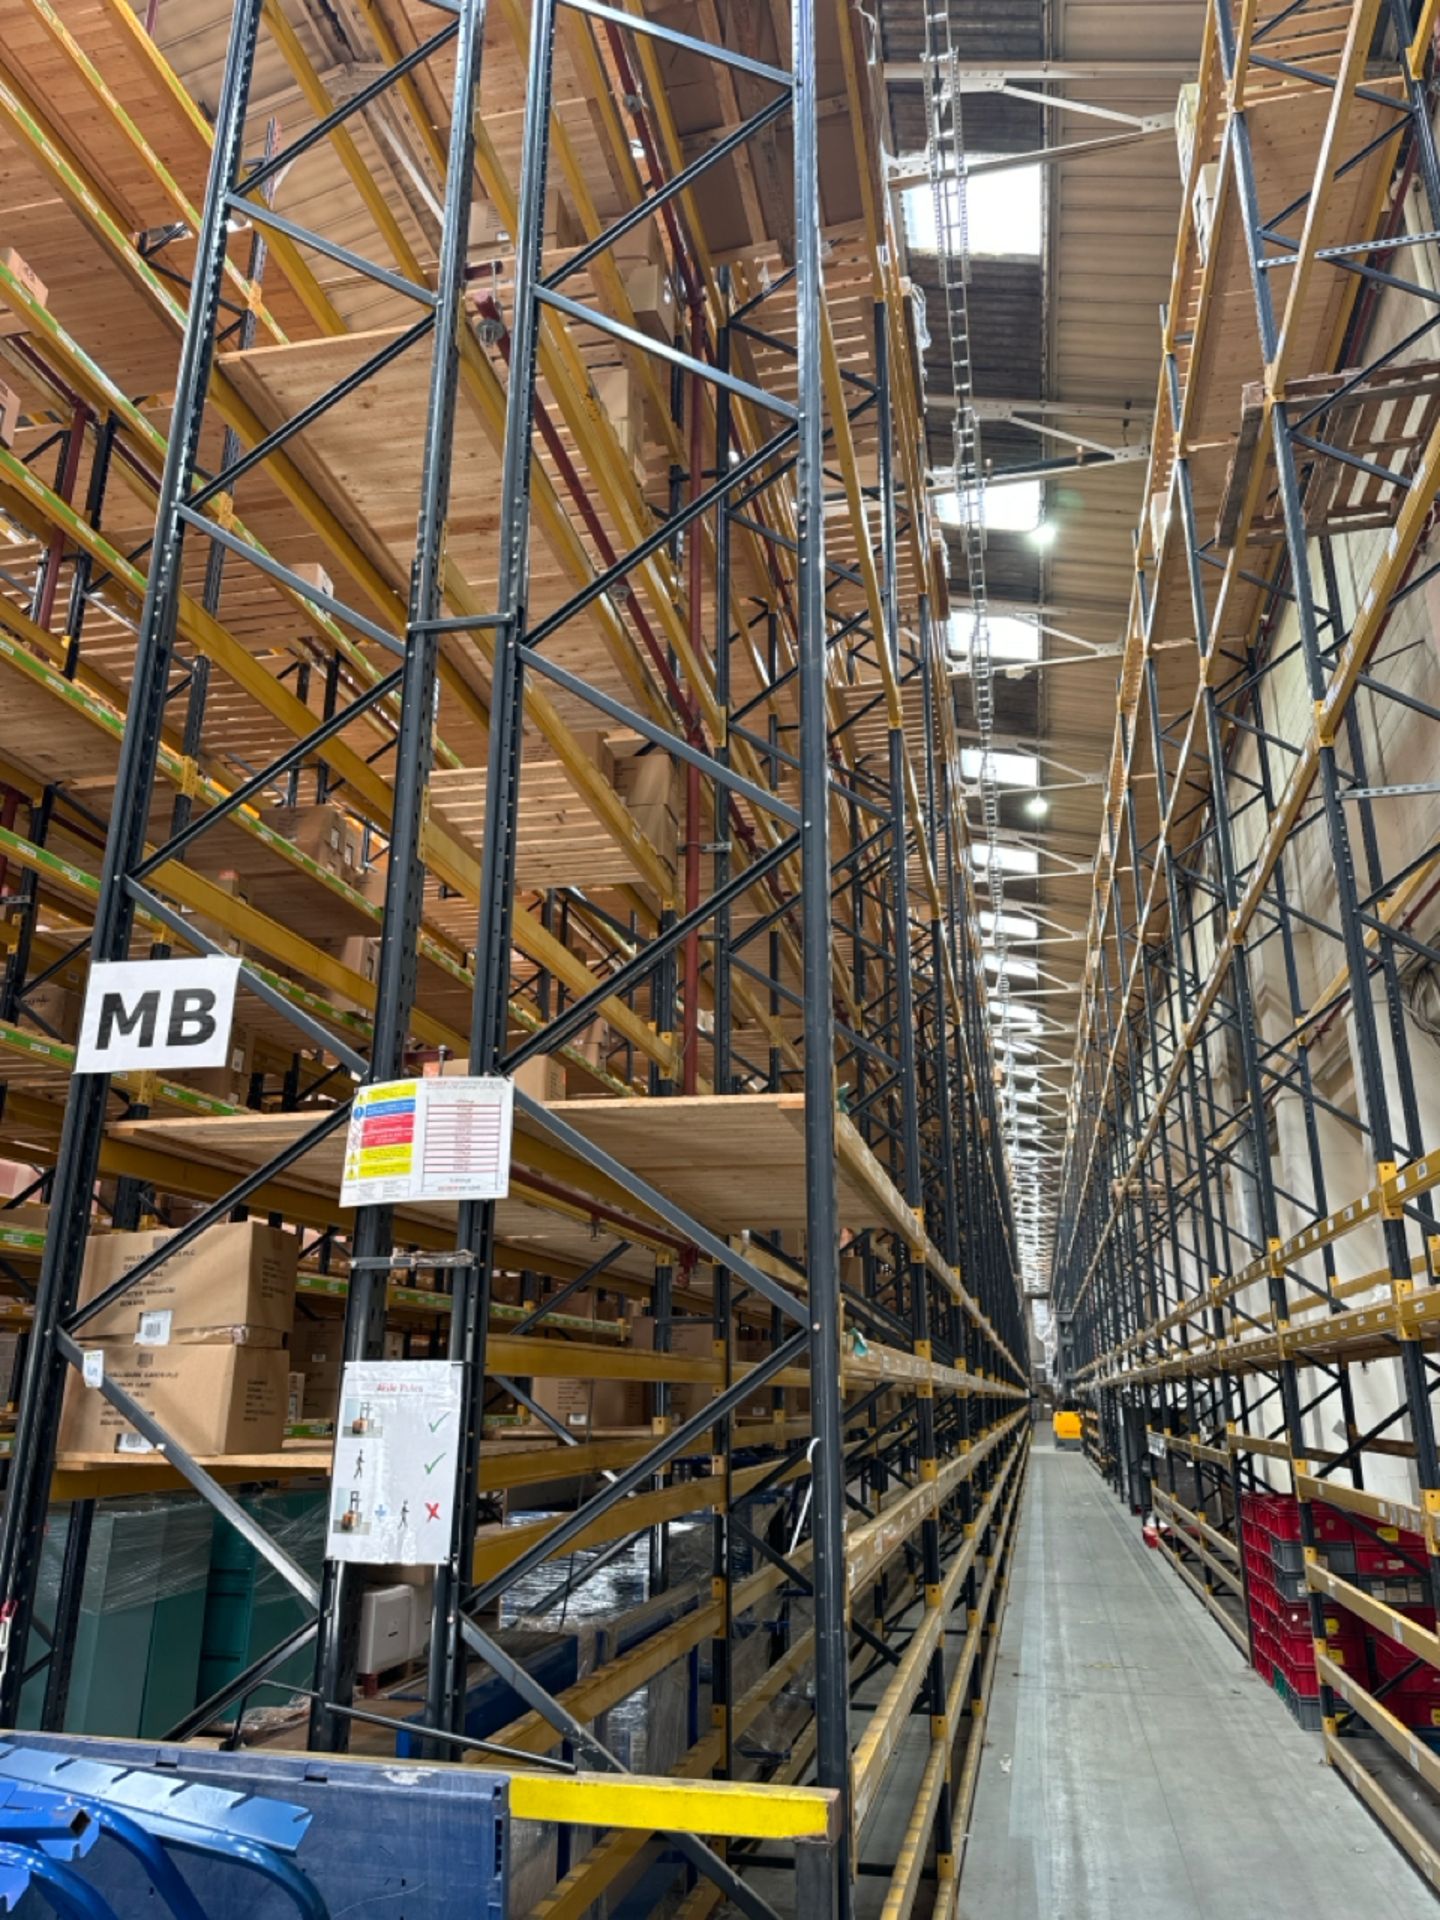 Run Of 18 Bays Of Boltless Industrial Pallet Racking - Image 15 of 15